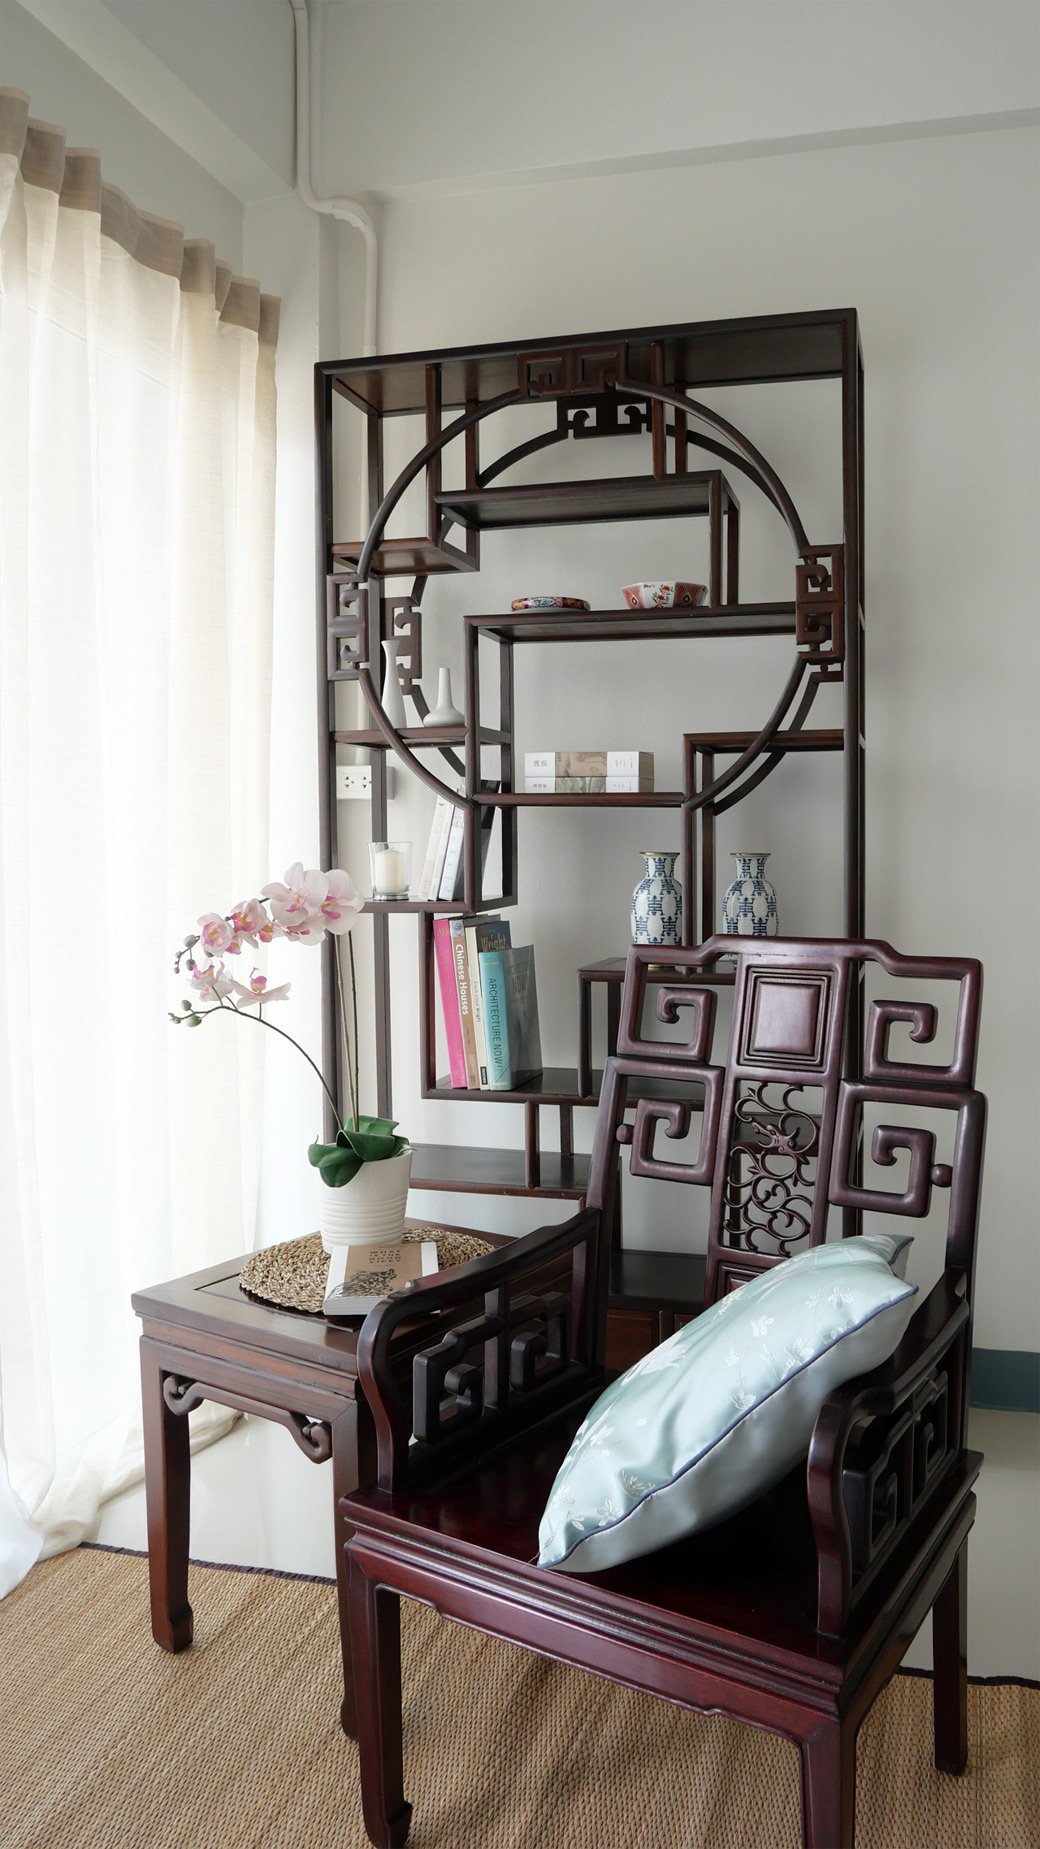 solid wood classic chair style in asian classic apartment decor